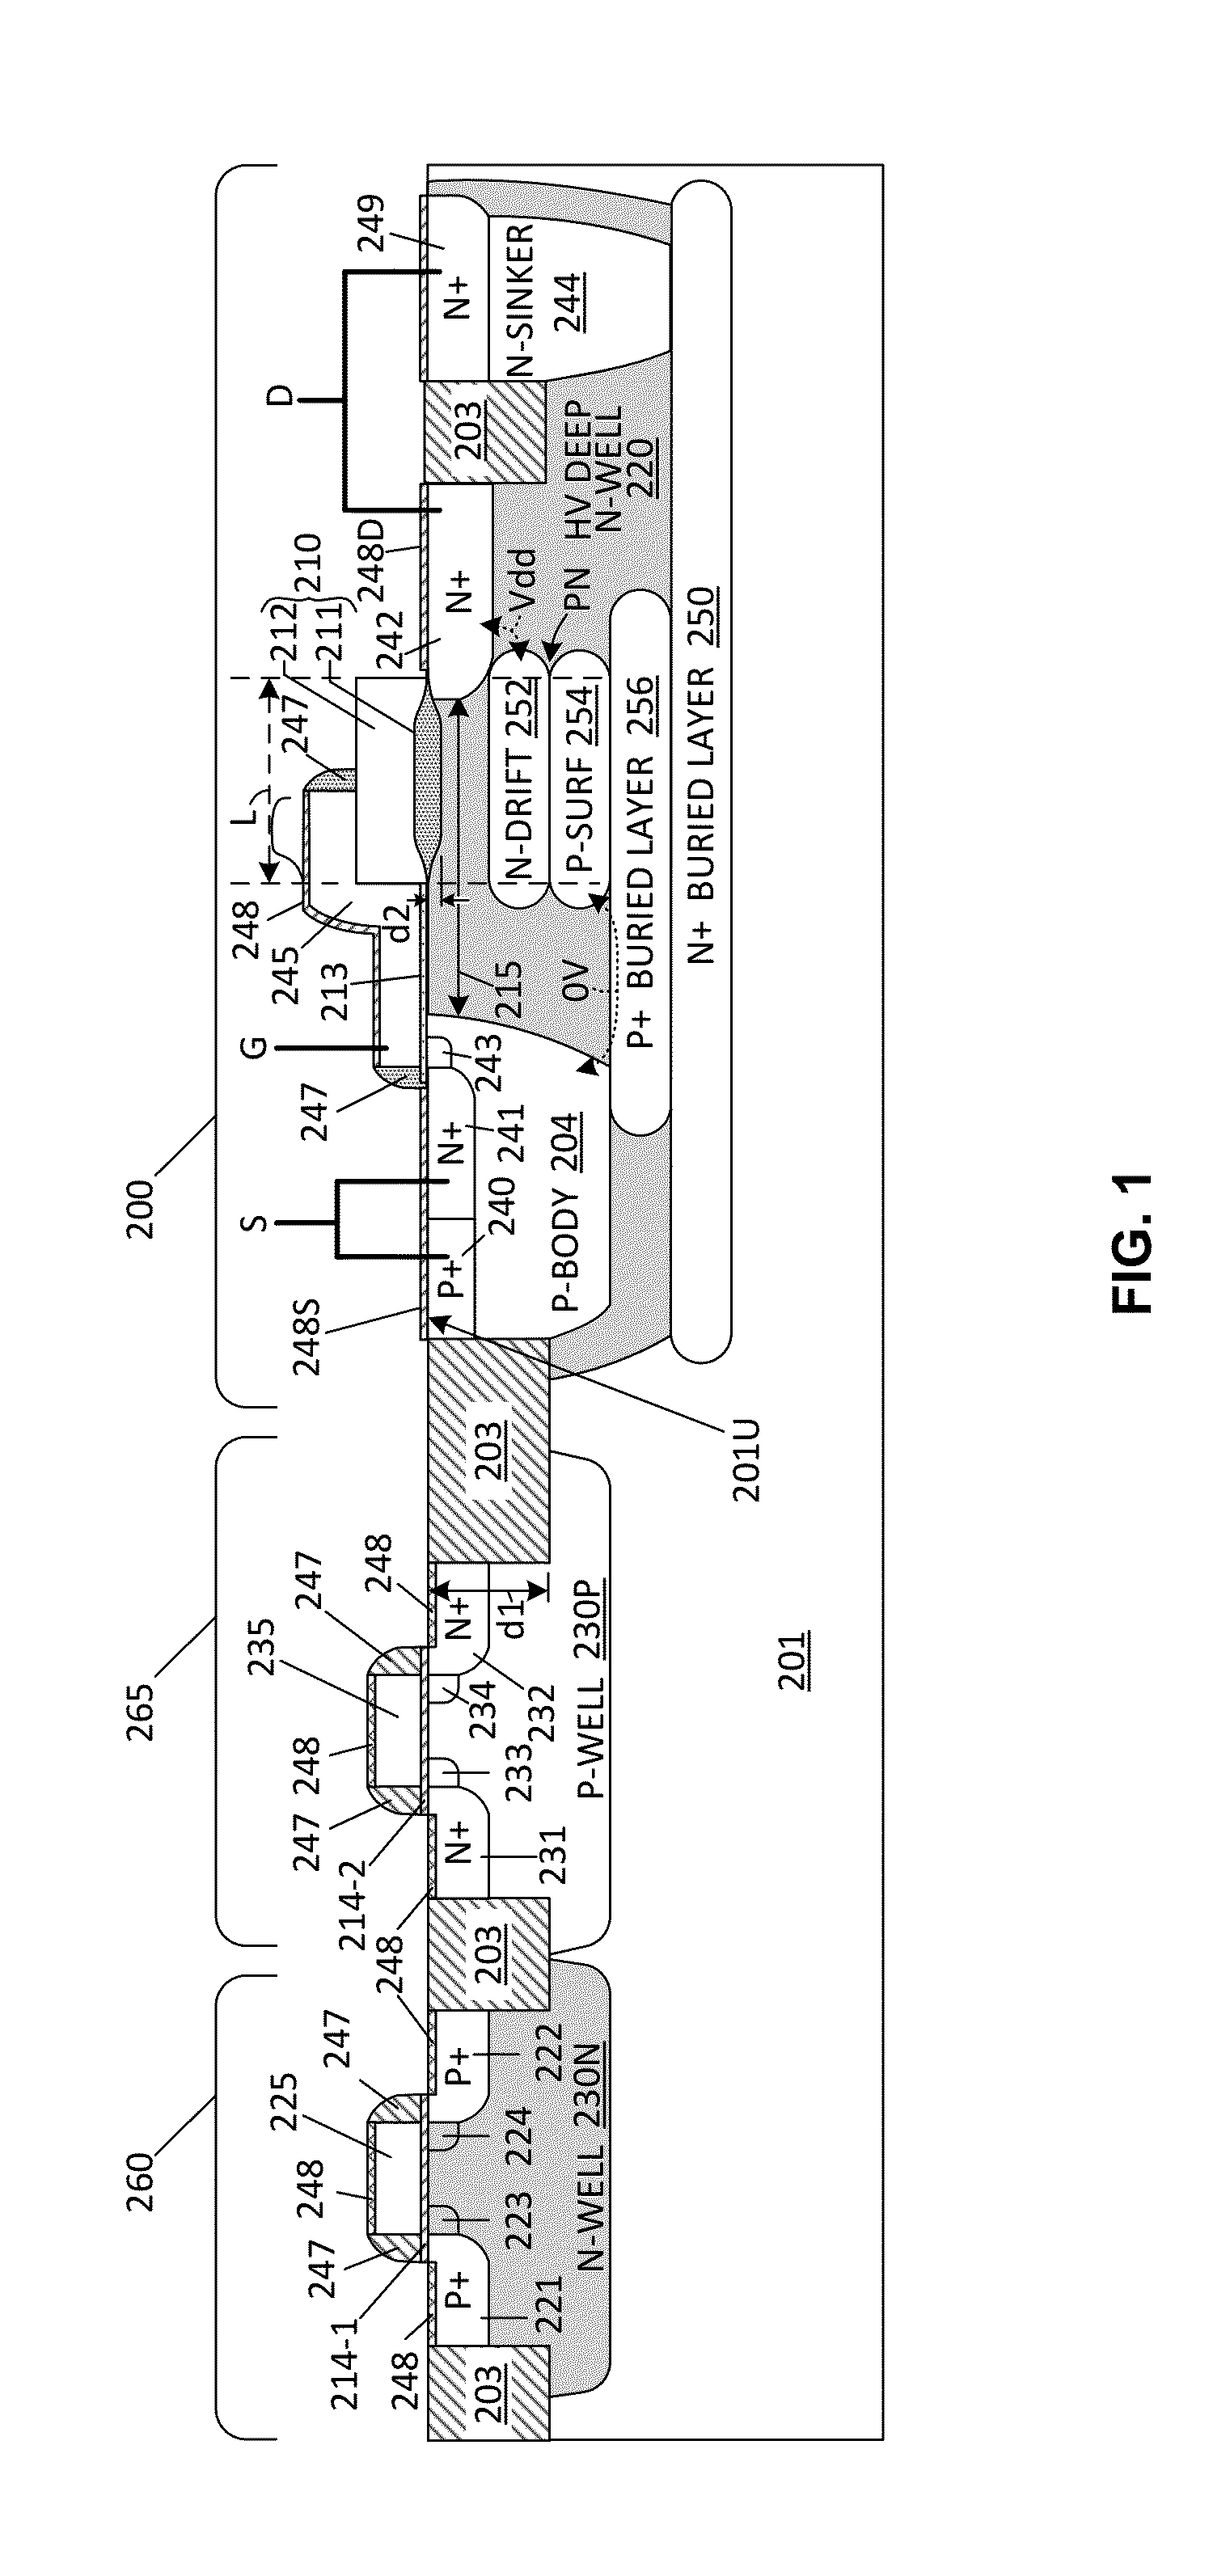 Double-Resurf LDMOS With Drift And PSURF Implants Self-Aligned To A Stacked Gate "BUMP" Structure